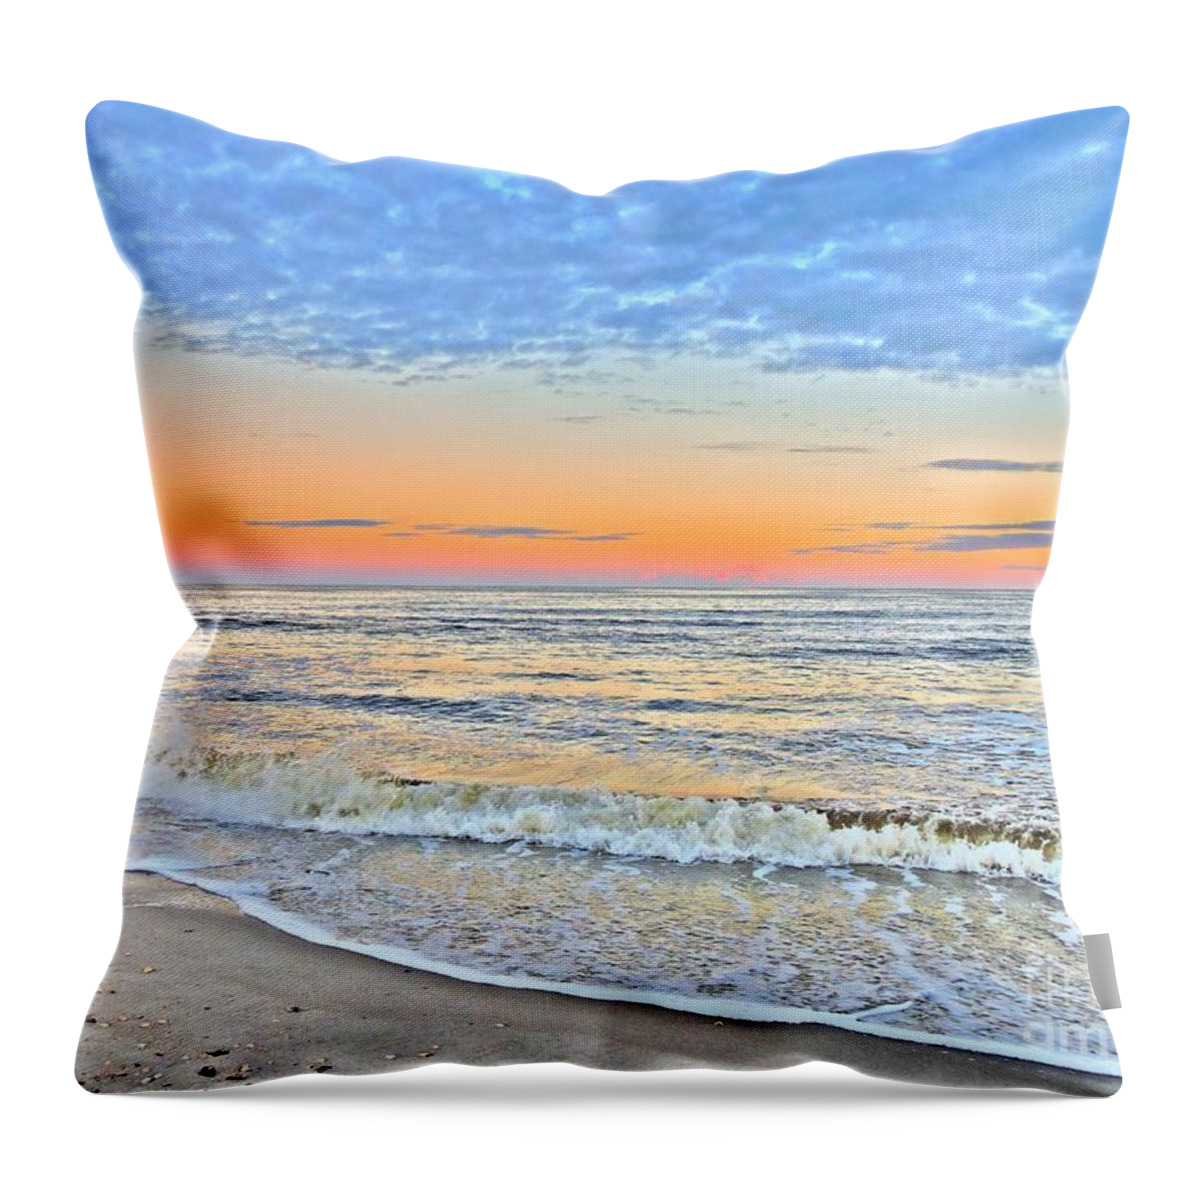 Art Throw Pillow featuring the photograph Serene Sunset by Shelia Kempf